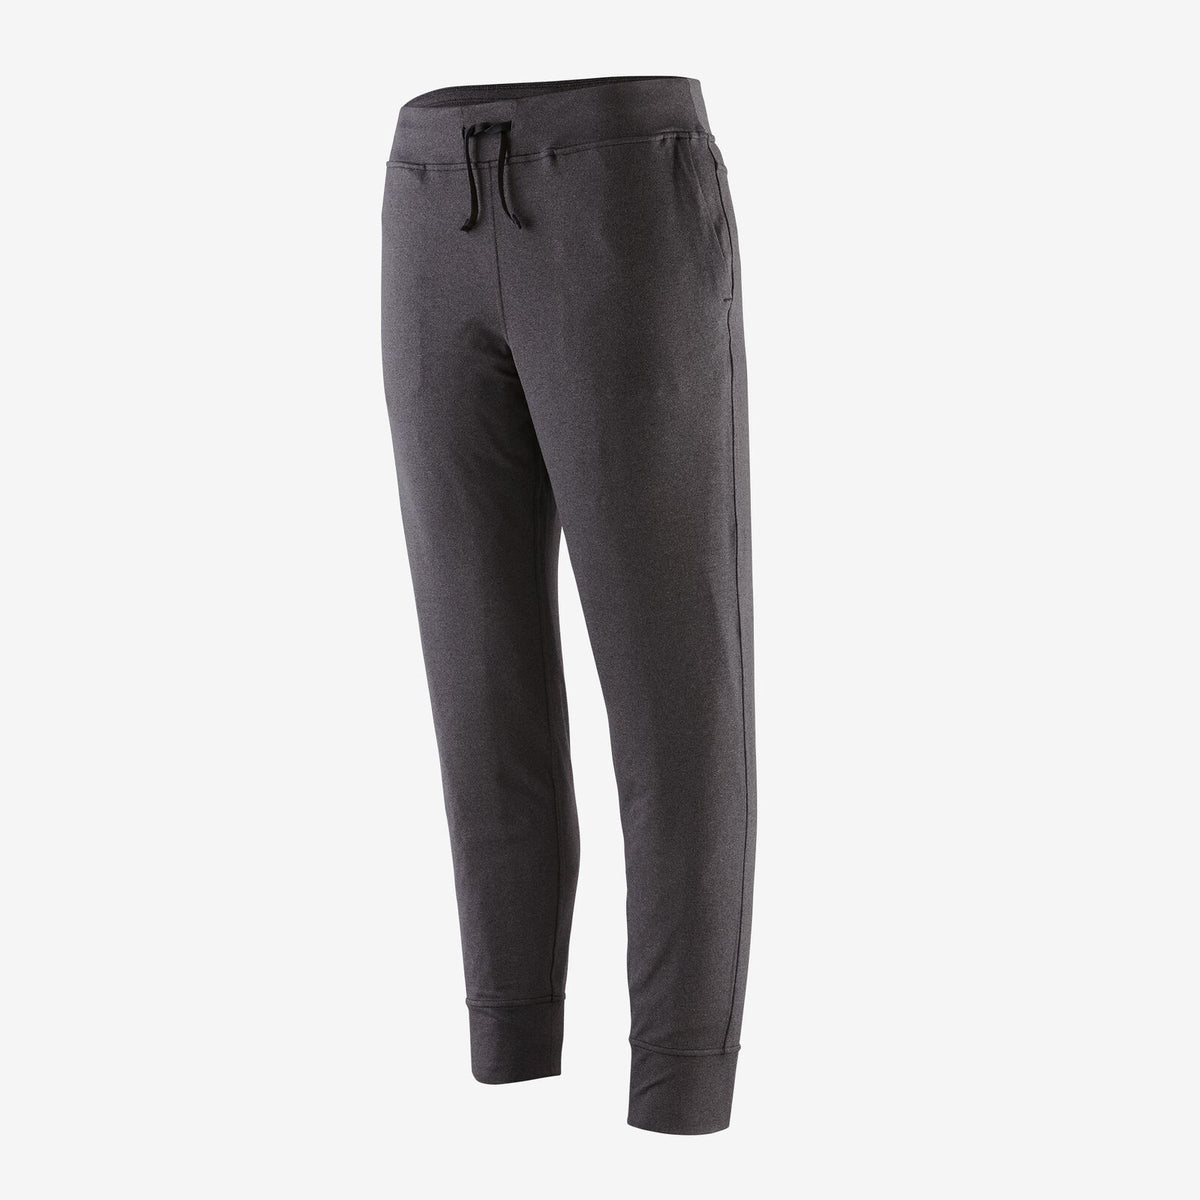 Patagonia R1 Daily Bottoms - Fleece trousers Women's